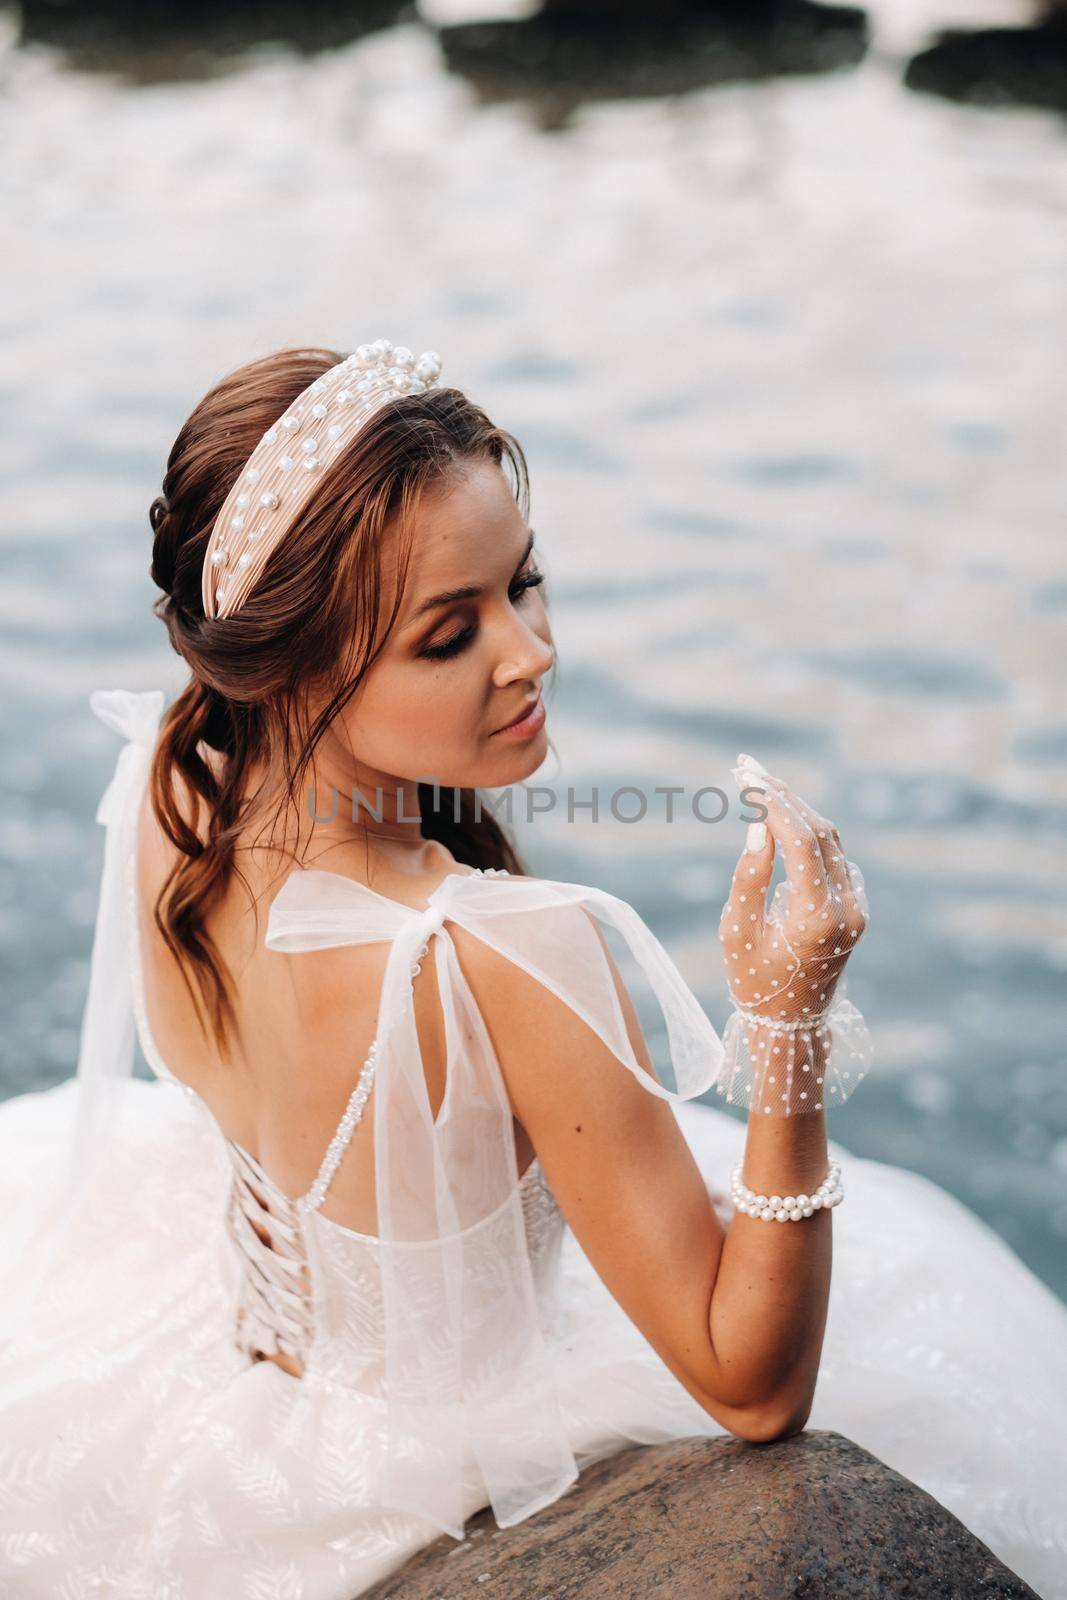 An elegant bride in a white dress, gloves and bare feet is sitting near a waterfall in the Park enjoying nature.A model in a wedding dress and gloves at a nature Park.Belarus by Lobachad